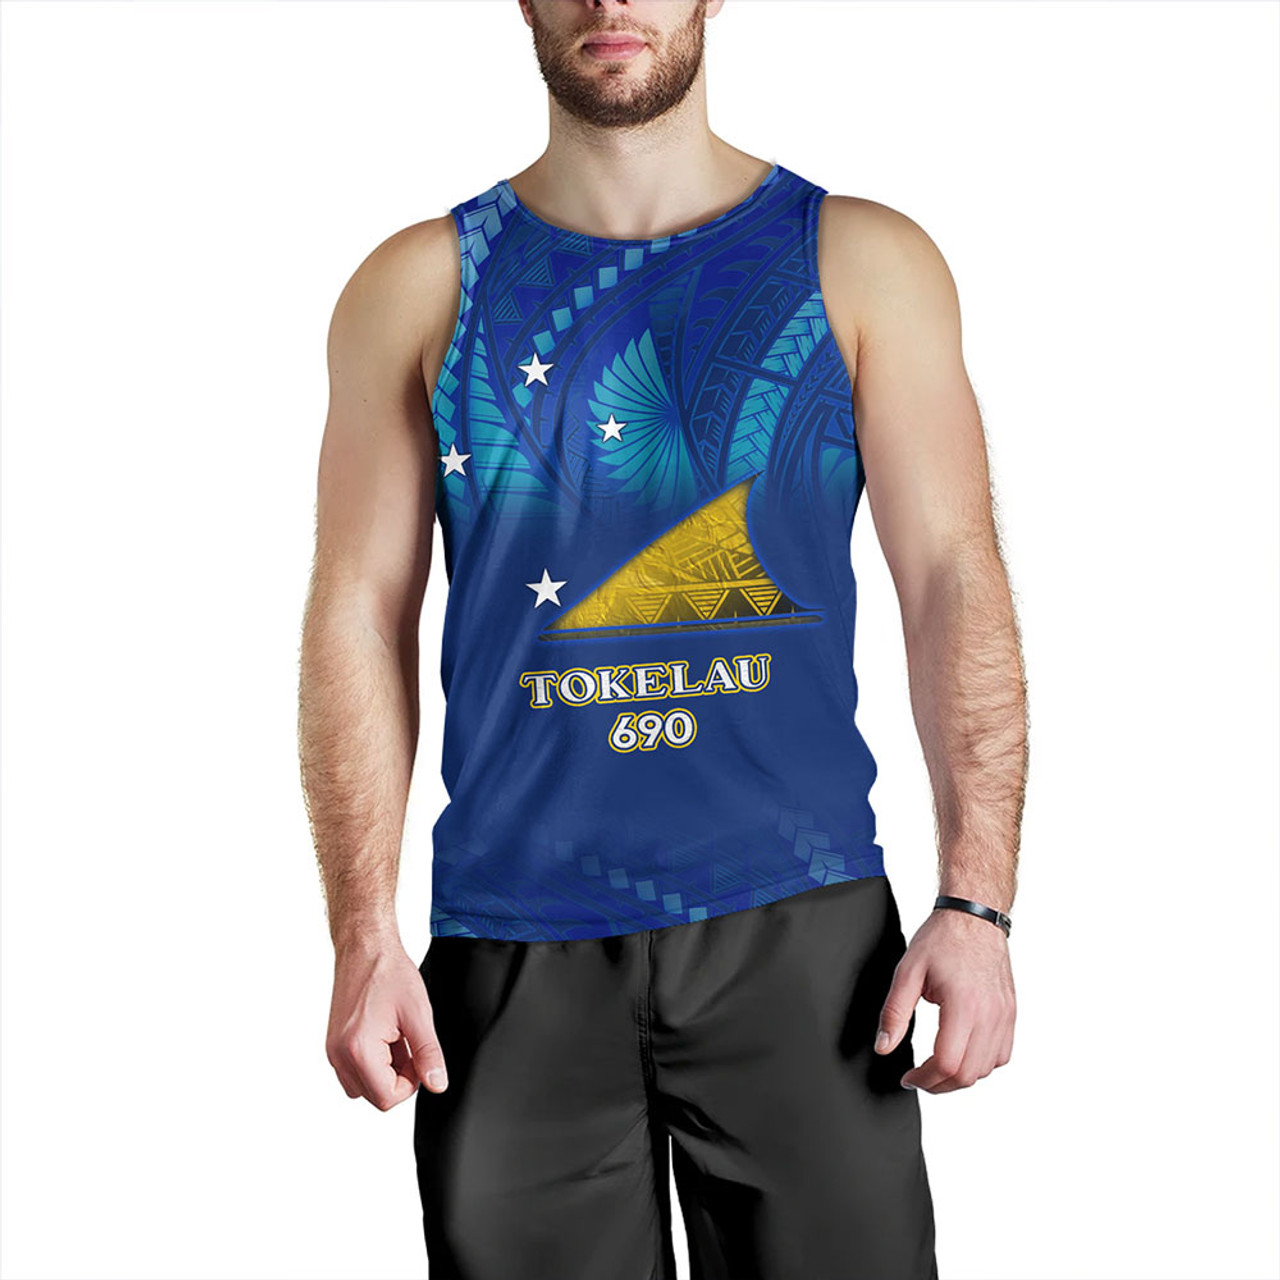 Tokelau Tank Top Flag Color With Traditional Patterns0